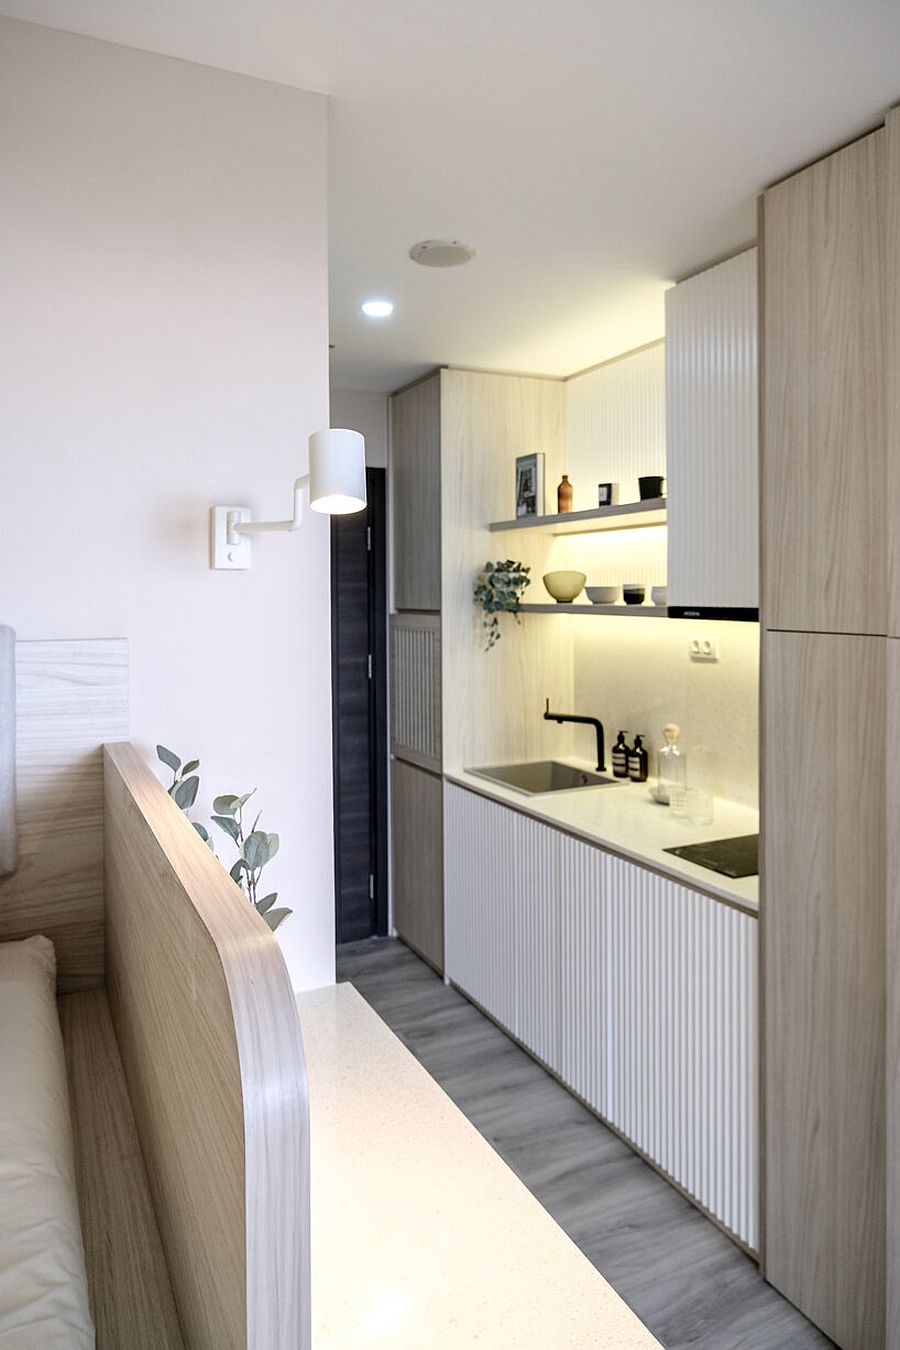 Ultra-small single-wall kitchen at the start of the apartment